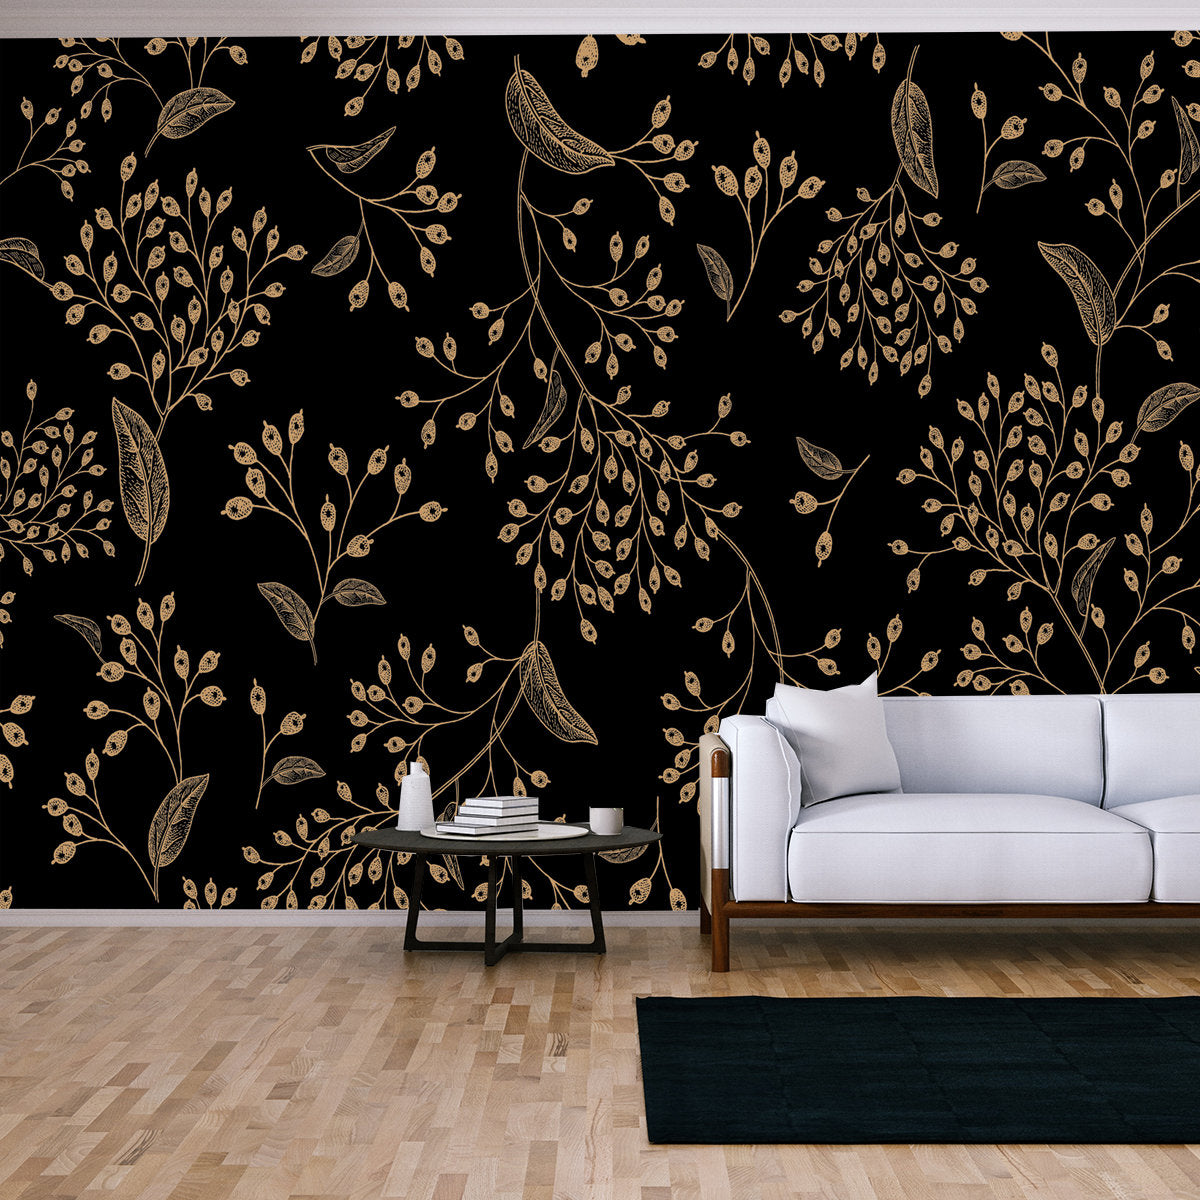 Floral Vintage Seamless Pattern. Black and Gold. Oriental Style Wallpaper Living Room Mural